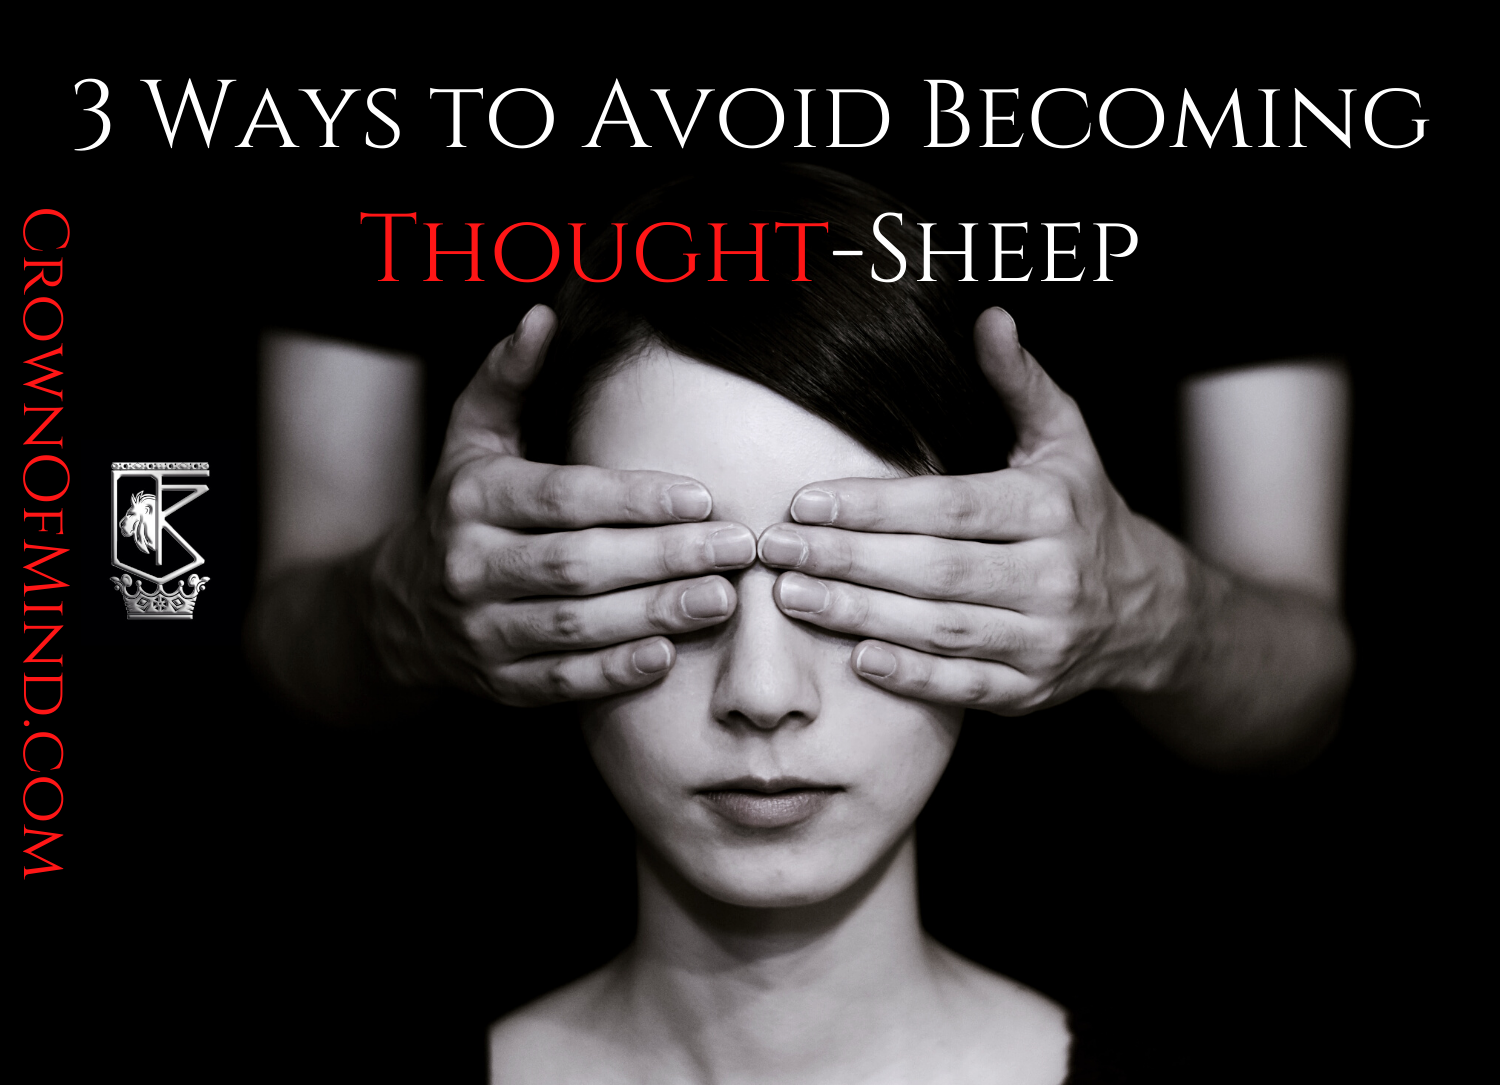 3 Ways to Avoid Becoming Thought-Sheep